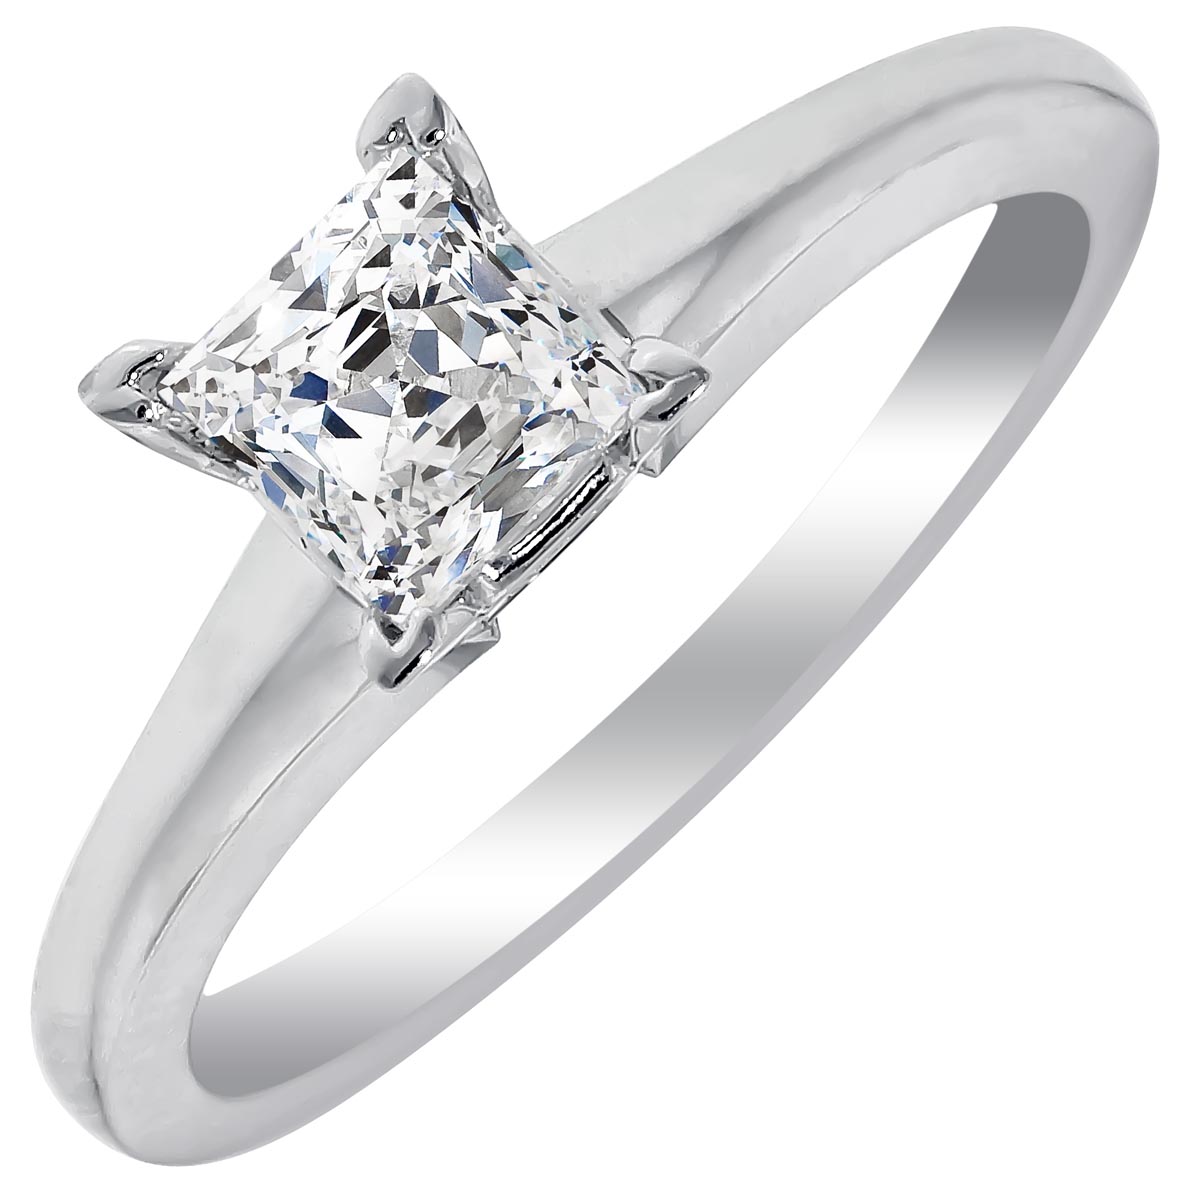 Princess Diamond Solitaire Engagement Ring in 14kt White Gold (3/4ct)